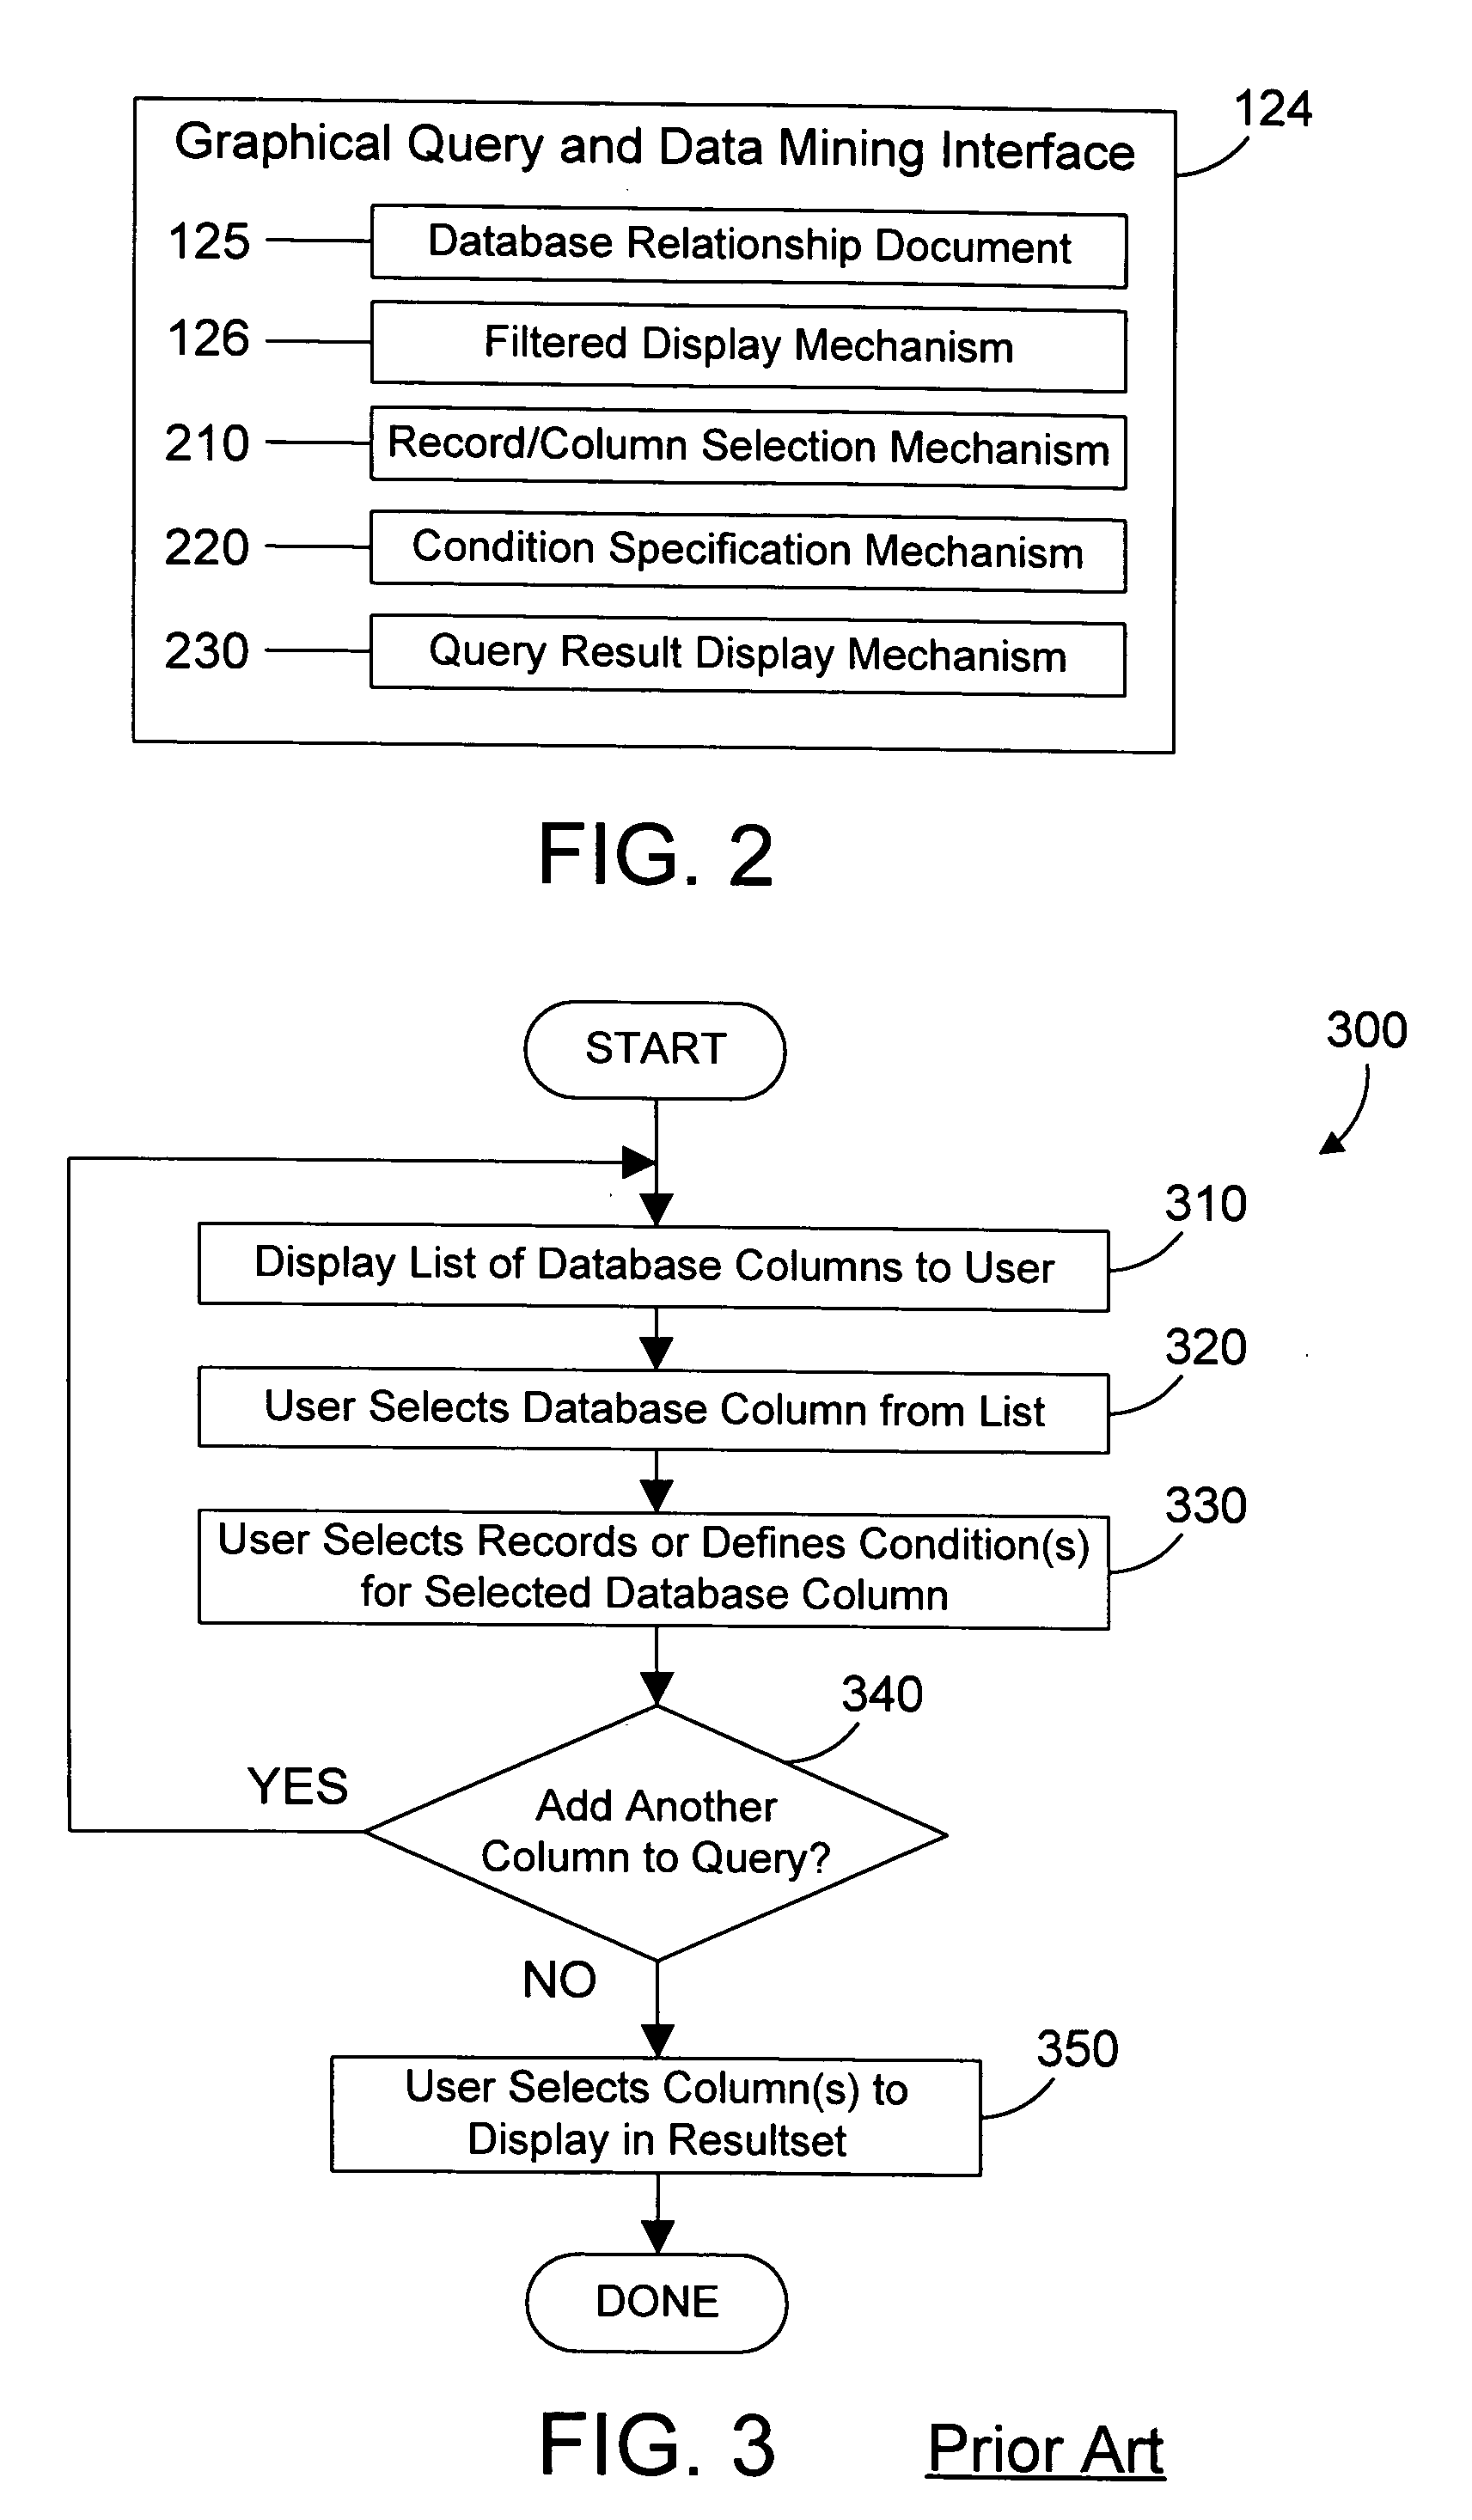 Dynamic graphical database query and data mining interface